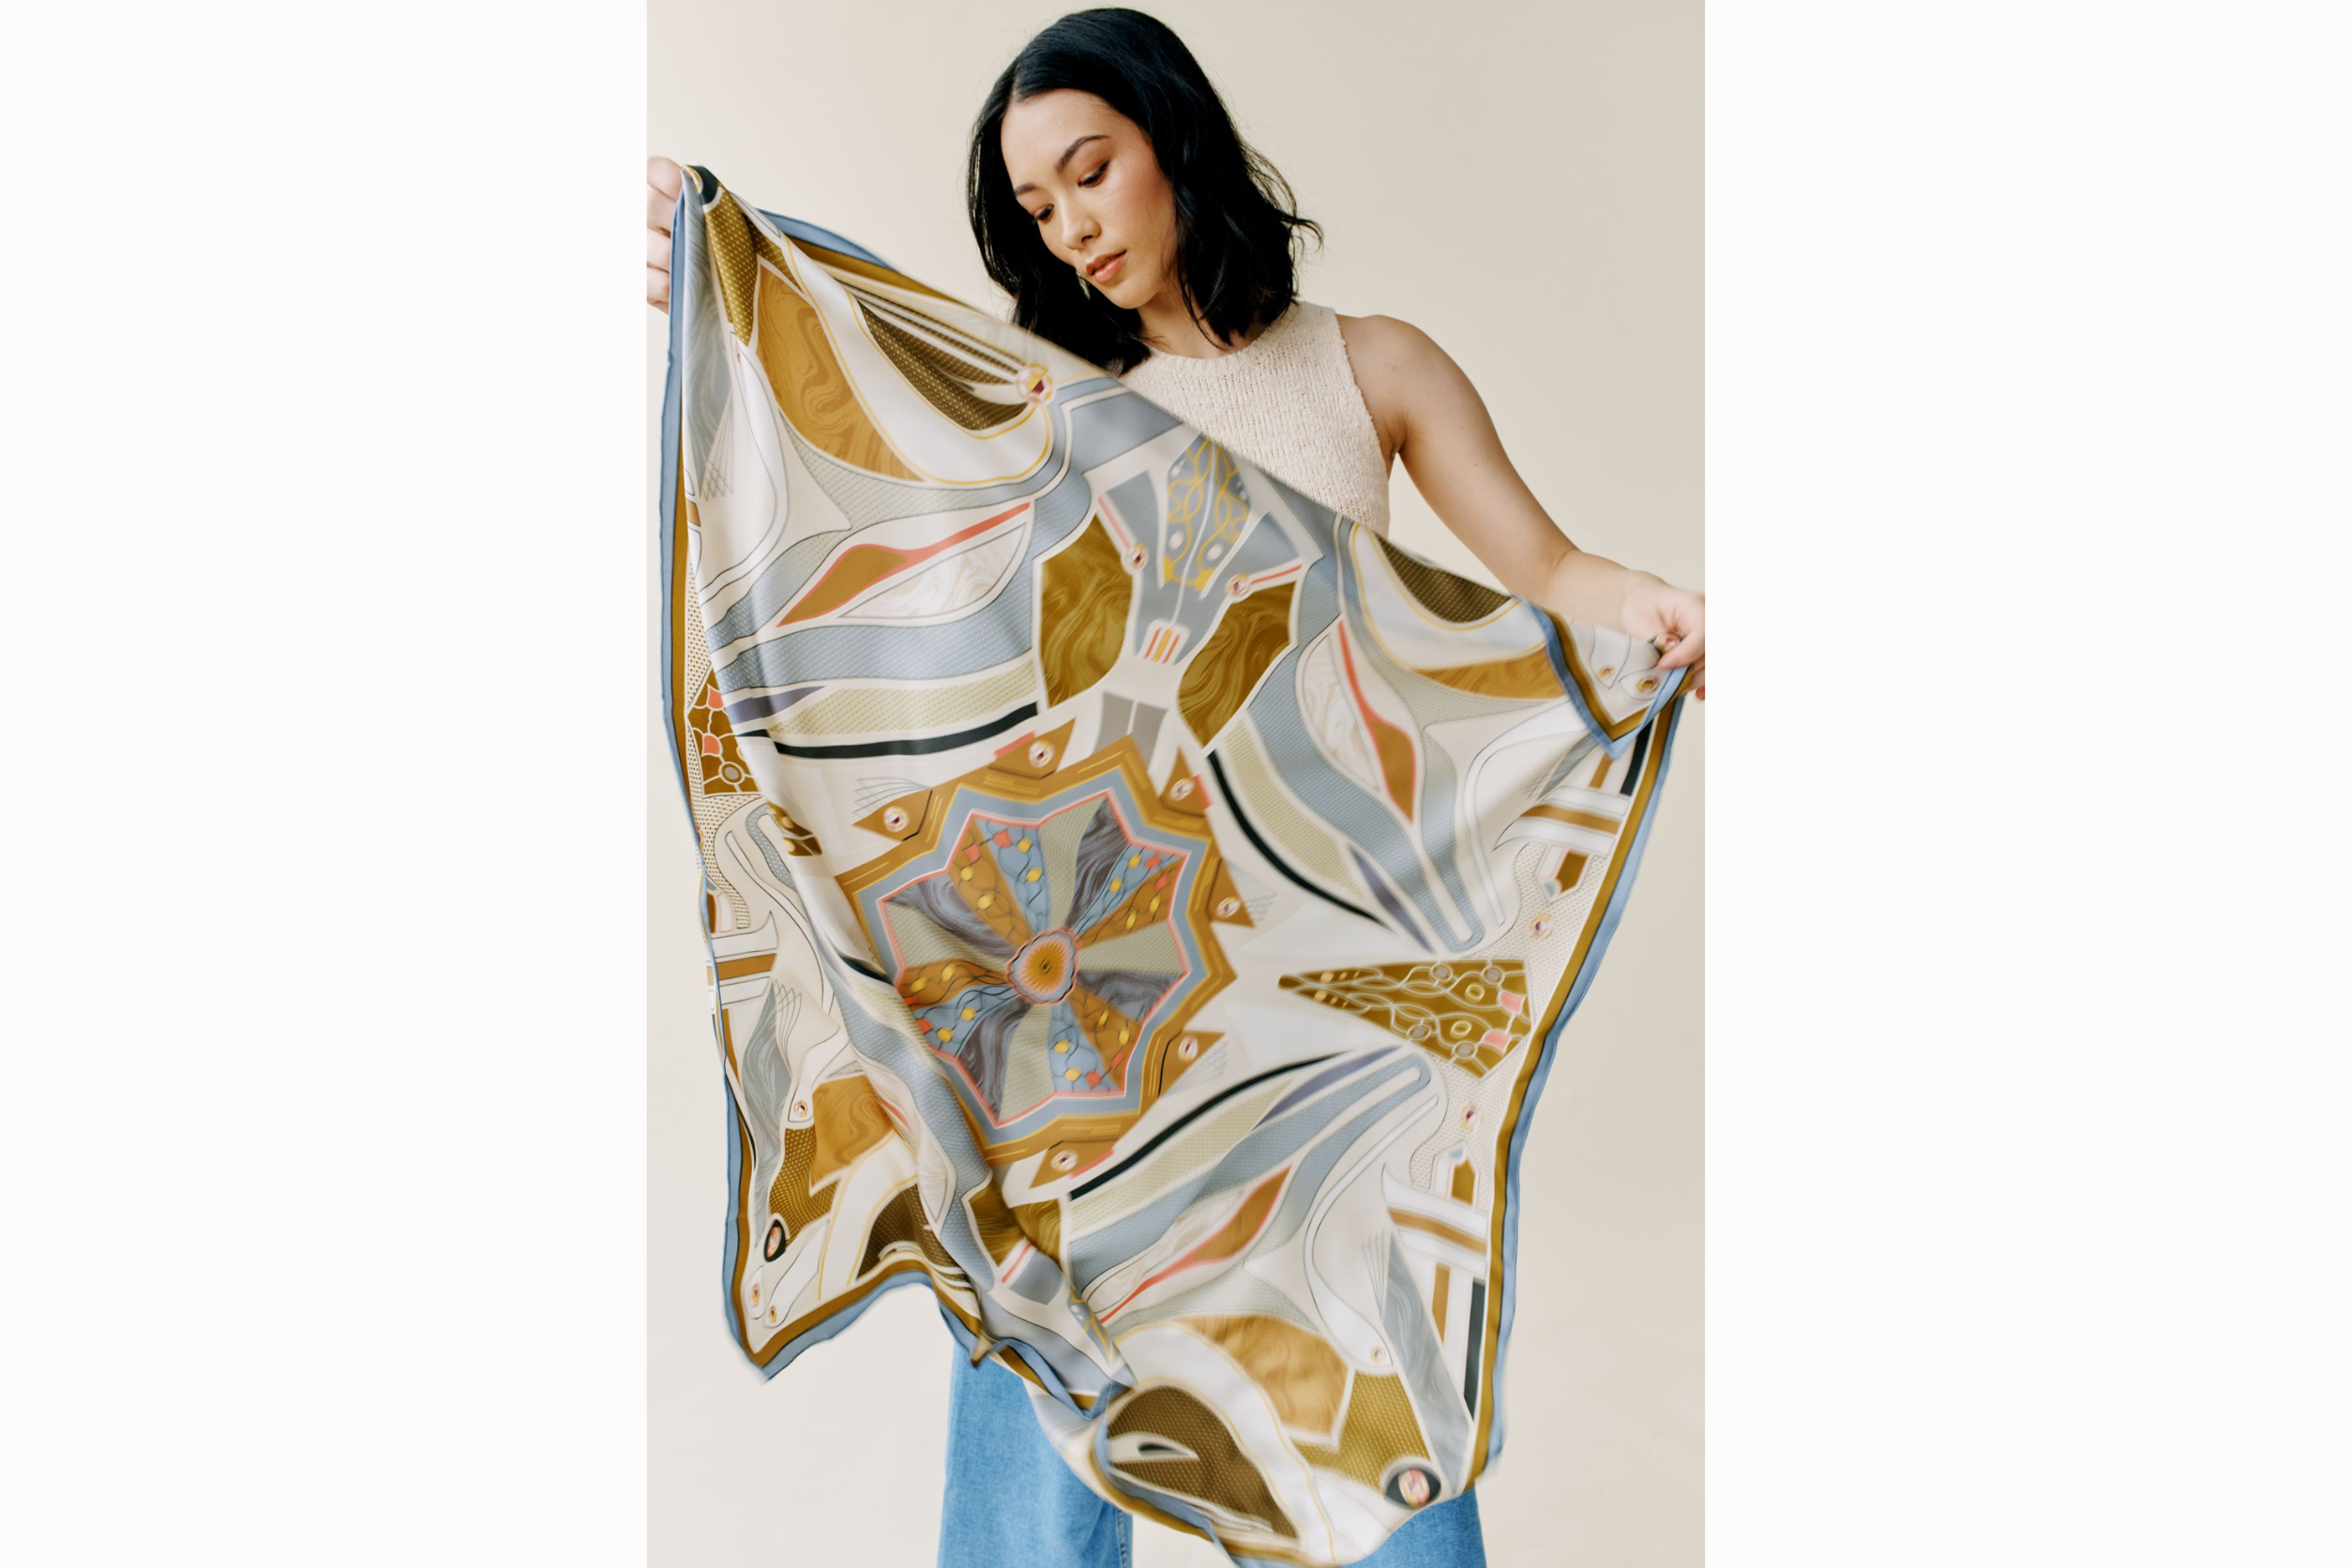 Model holds up 100% silk square scarf featuring rectilinear geometry, intricate line art, and aerodynamic curves in shades of cream and soft gray with pops of pink and metallic tones